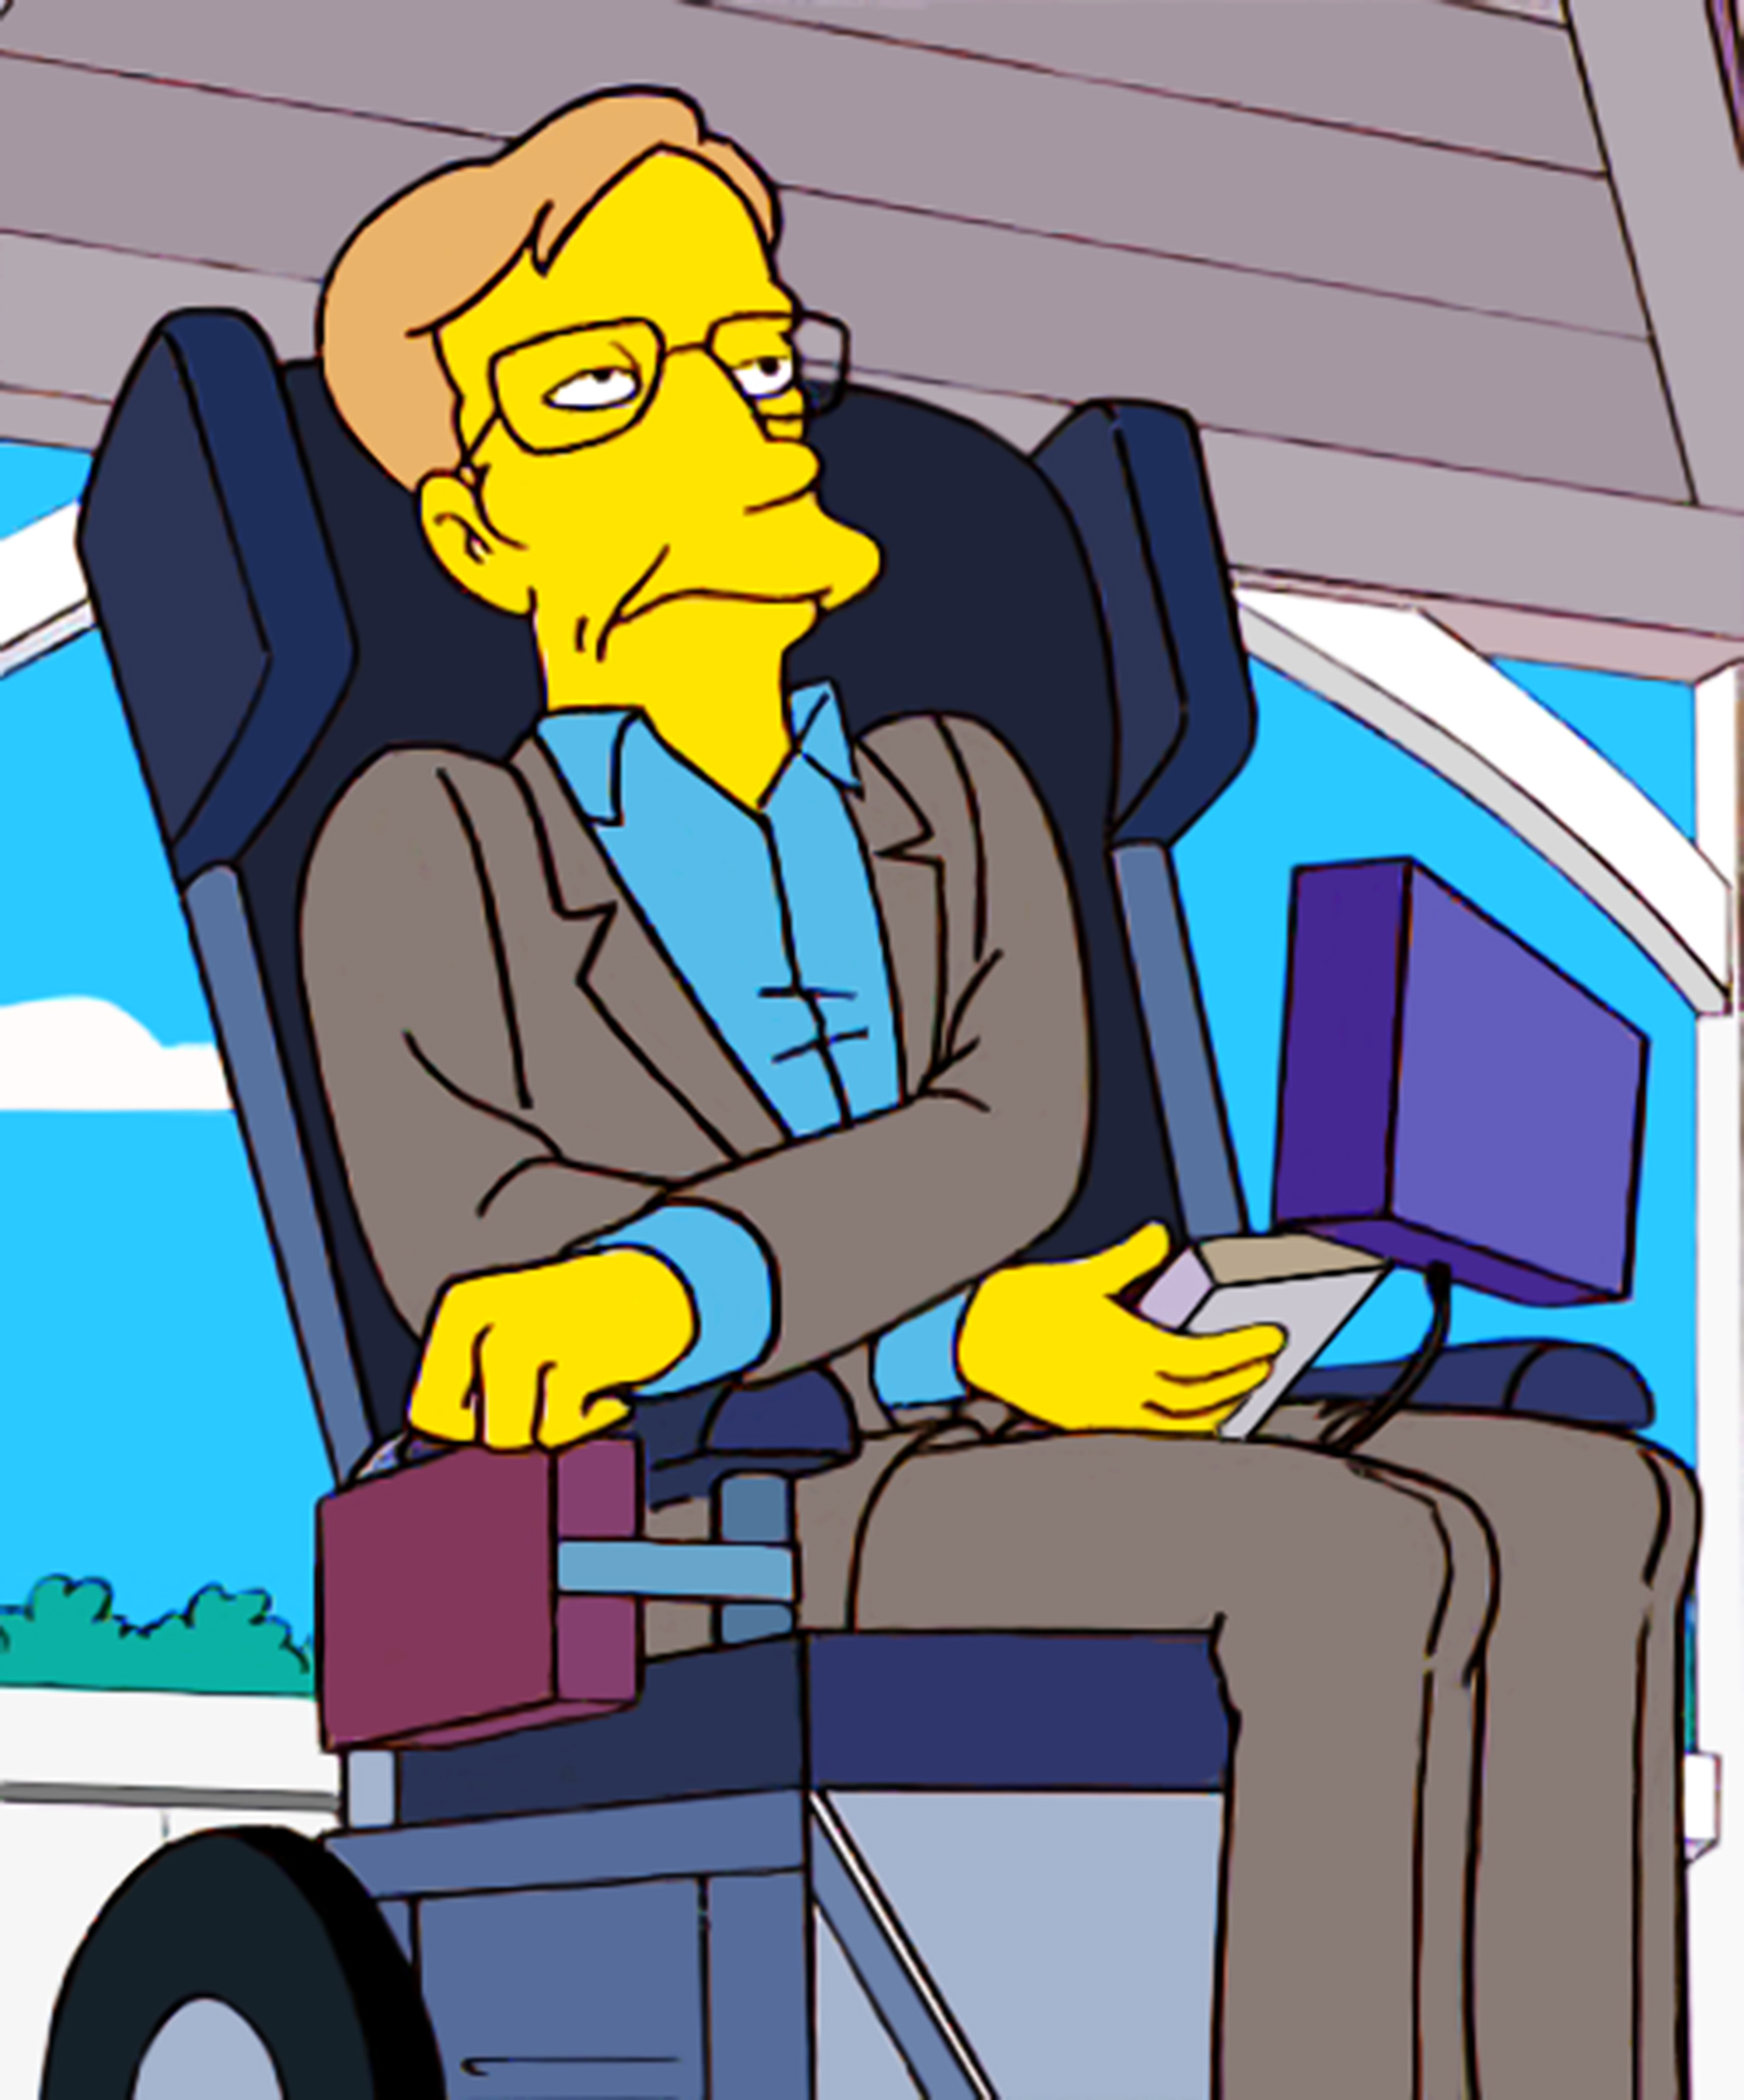 Stephen Hawking: Dr. Stephen Hawking first paid Springfield a visit as himself in 1999 on the episode "They Saved Lisa's Brain" and is summarily unimpressed by the improvements to the town made by Lisa and her MENSA compatriots. He went onto make three more appearances as himself, “Don’t Fear the Roofer” in 2005, “Stop or My Dog Will Shoot!” in 2007, and “Elementary School Musical” in 2010.